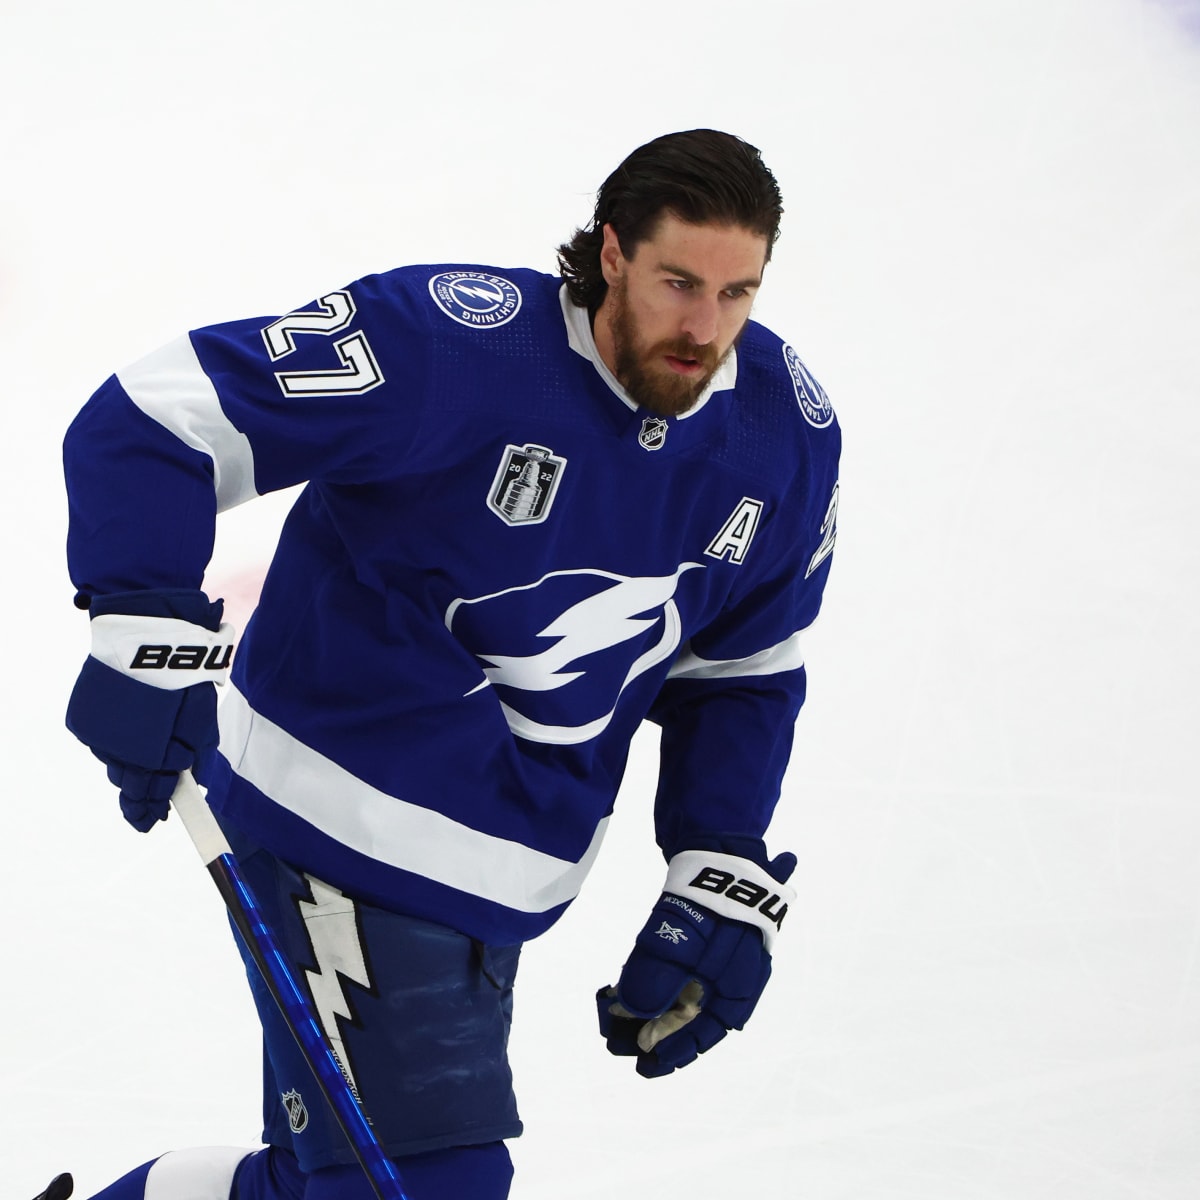 Ryan McDonagh Traded from Lightning to Predators for Philippe